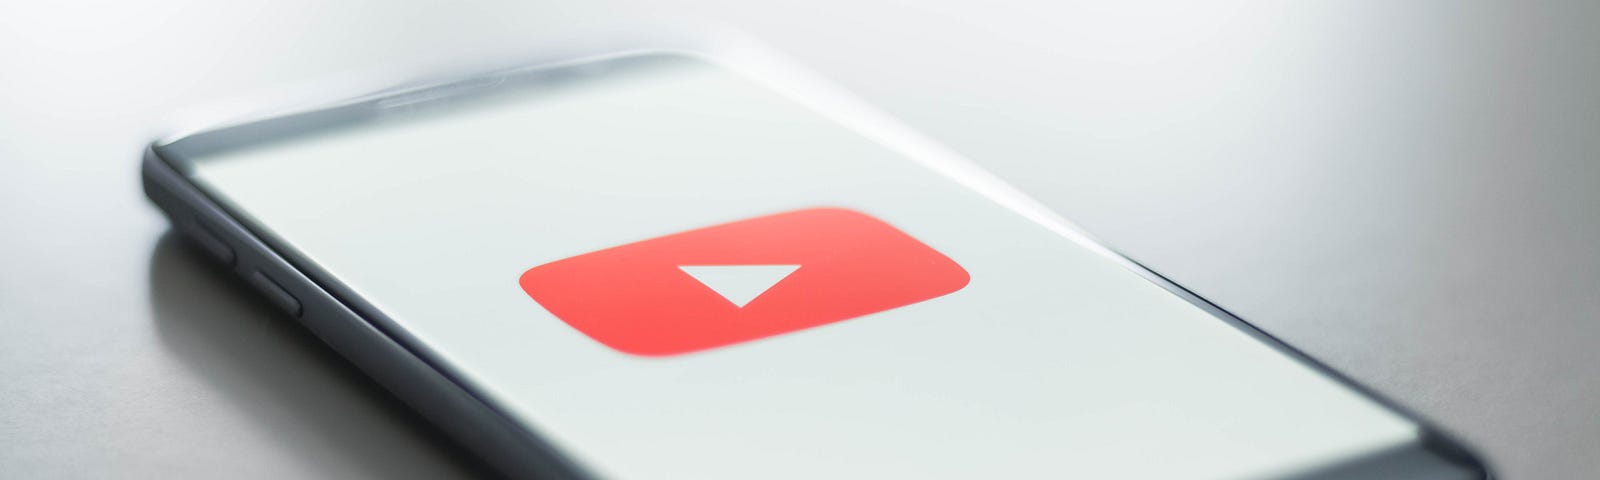 YouTube is one of the biggest platforms on the internet, but it started out as a very different place.